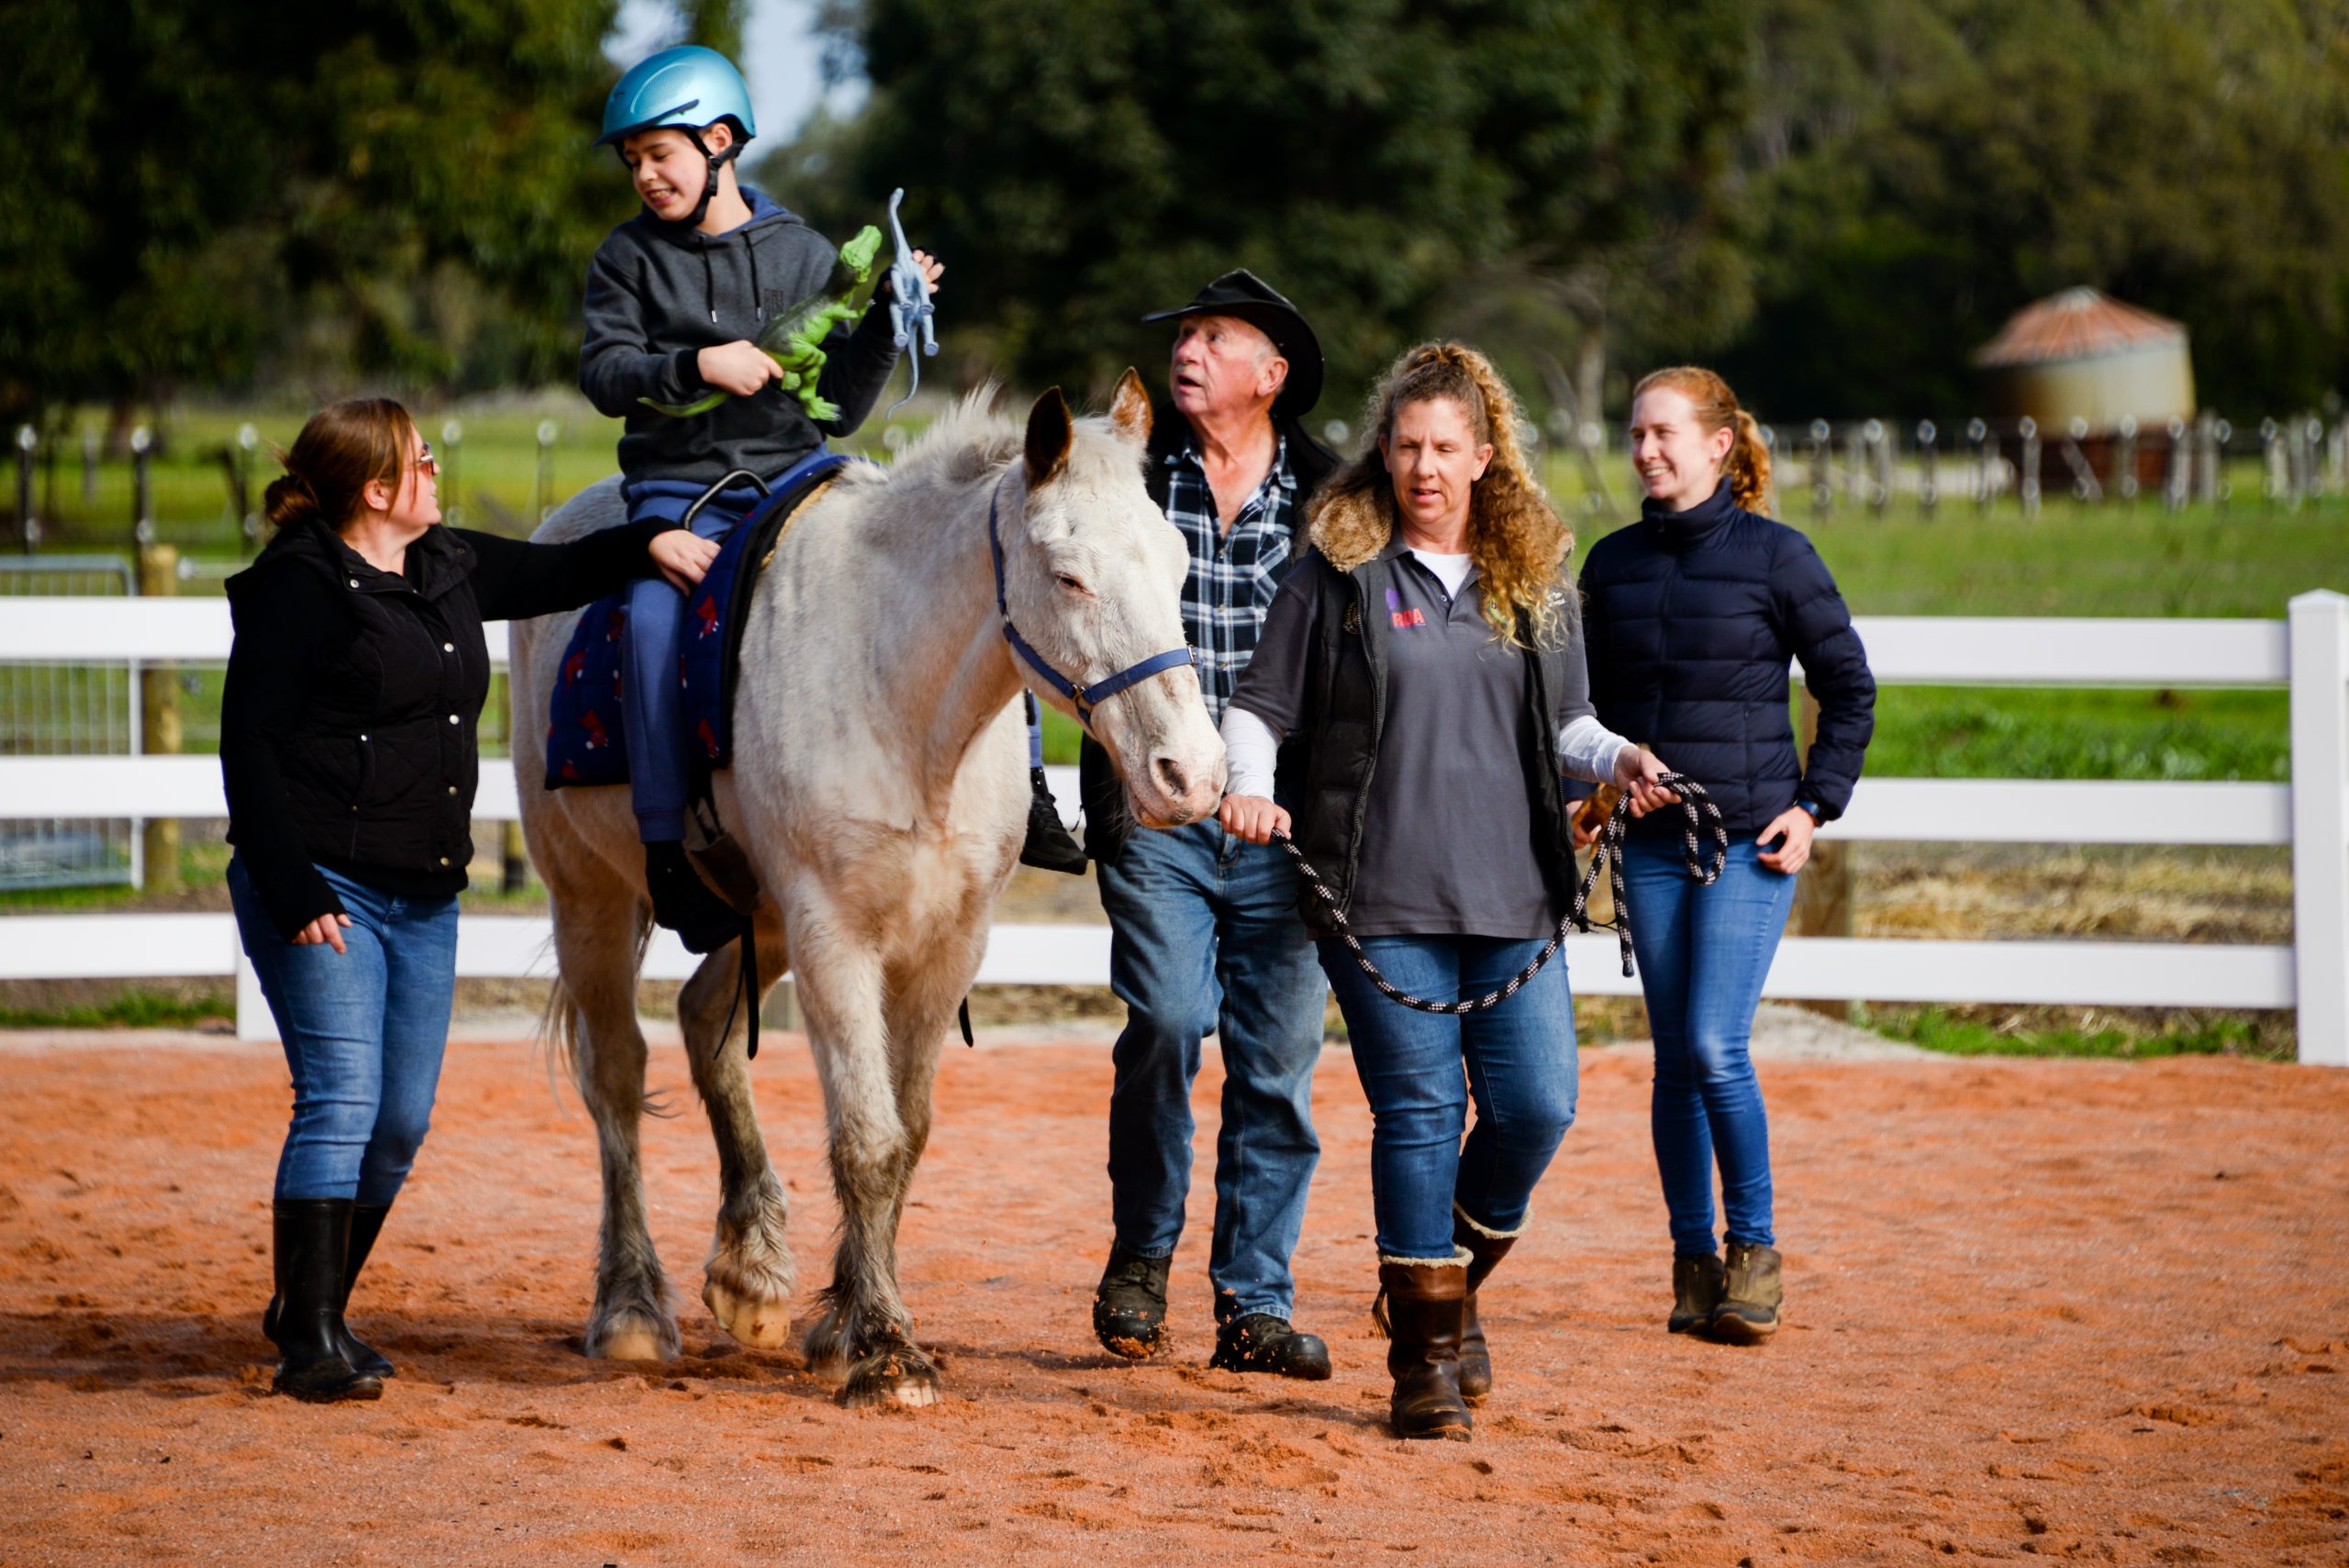 Young biy is sitting on a white horse during hippotherapy. He is surrounded by four people who are assisting